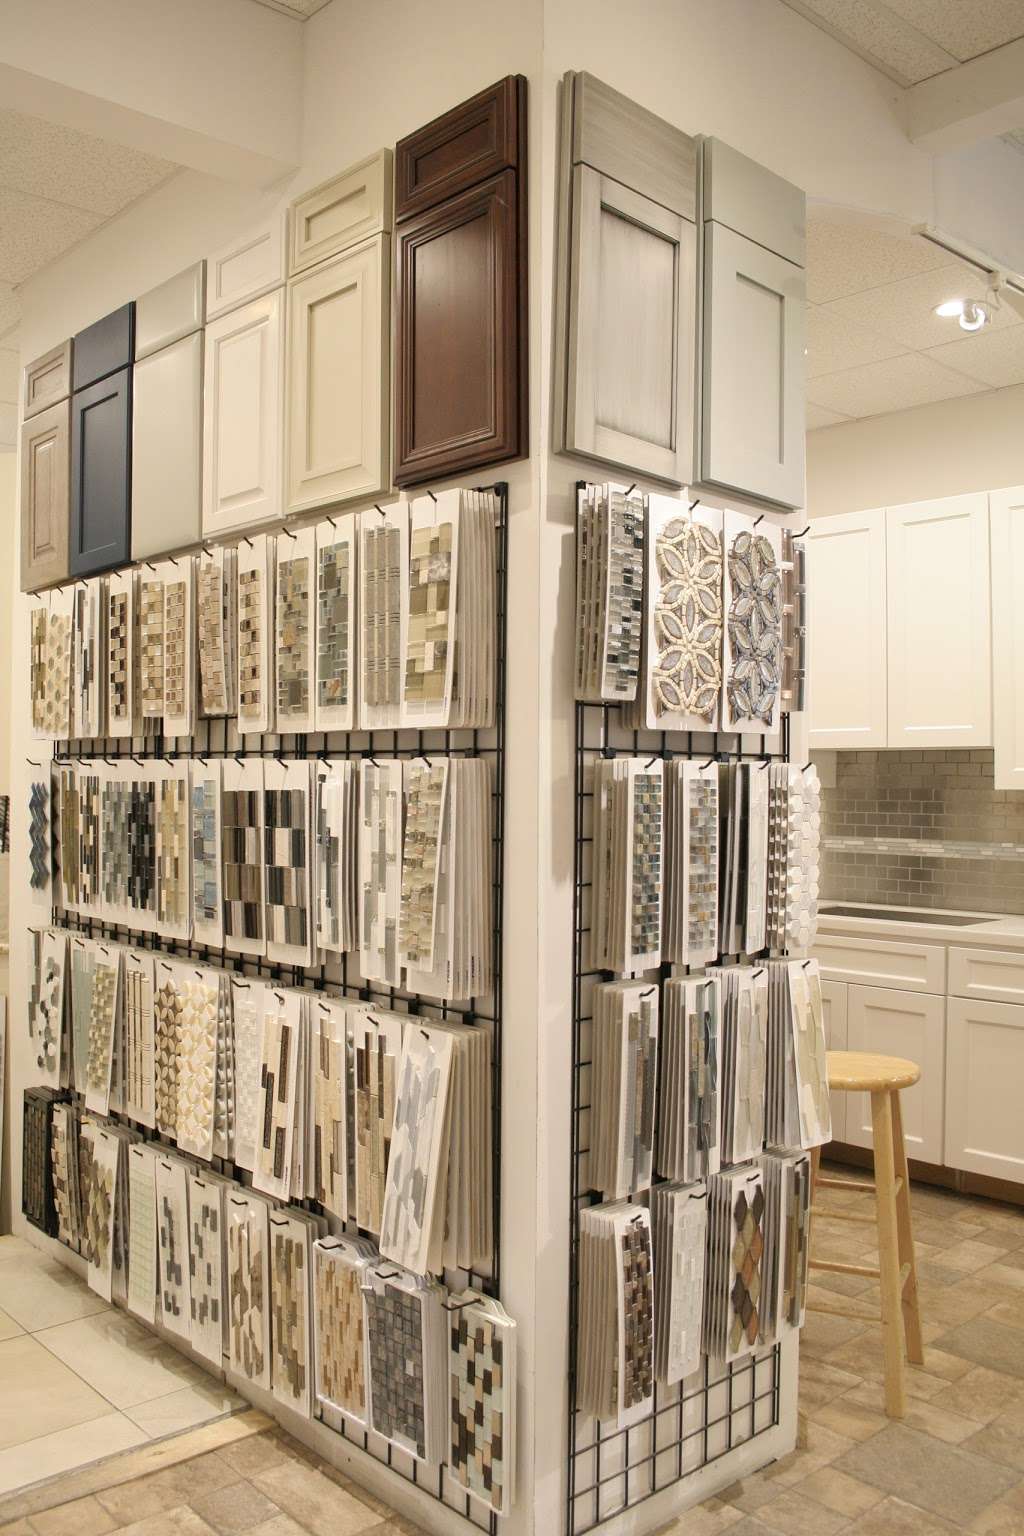 KABINET KING USA Kitchen Cabinets and Countertops Showroom | 211-36 Hillside Avenue, Queens Village, NY 11427 | Phone: (718) 740-7800